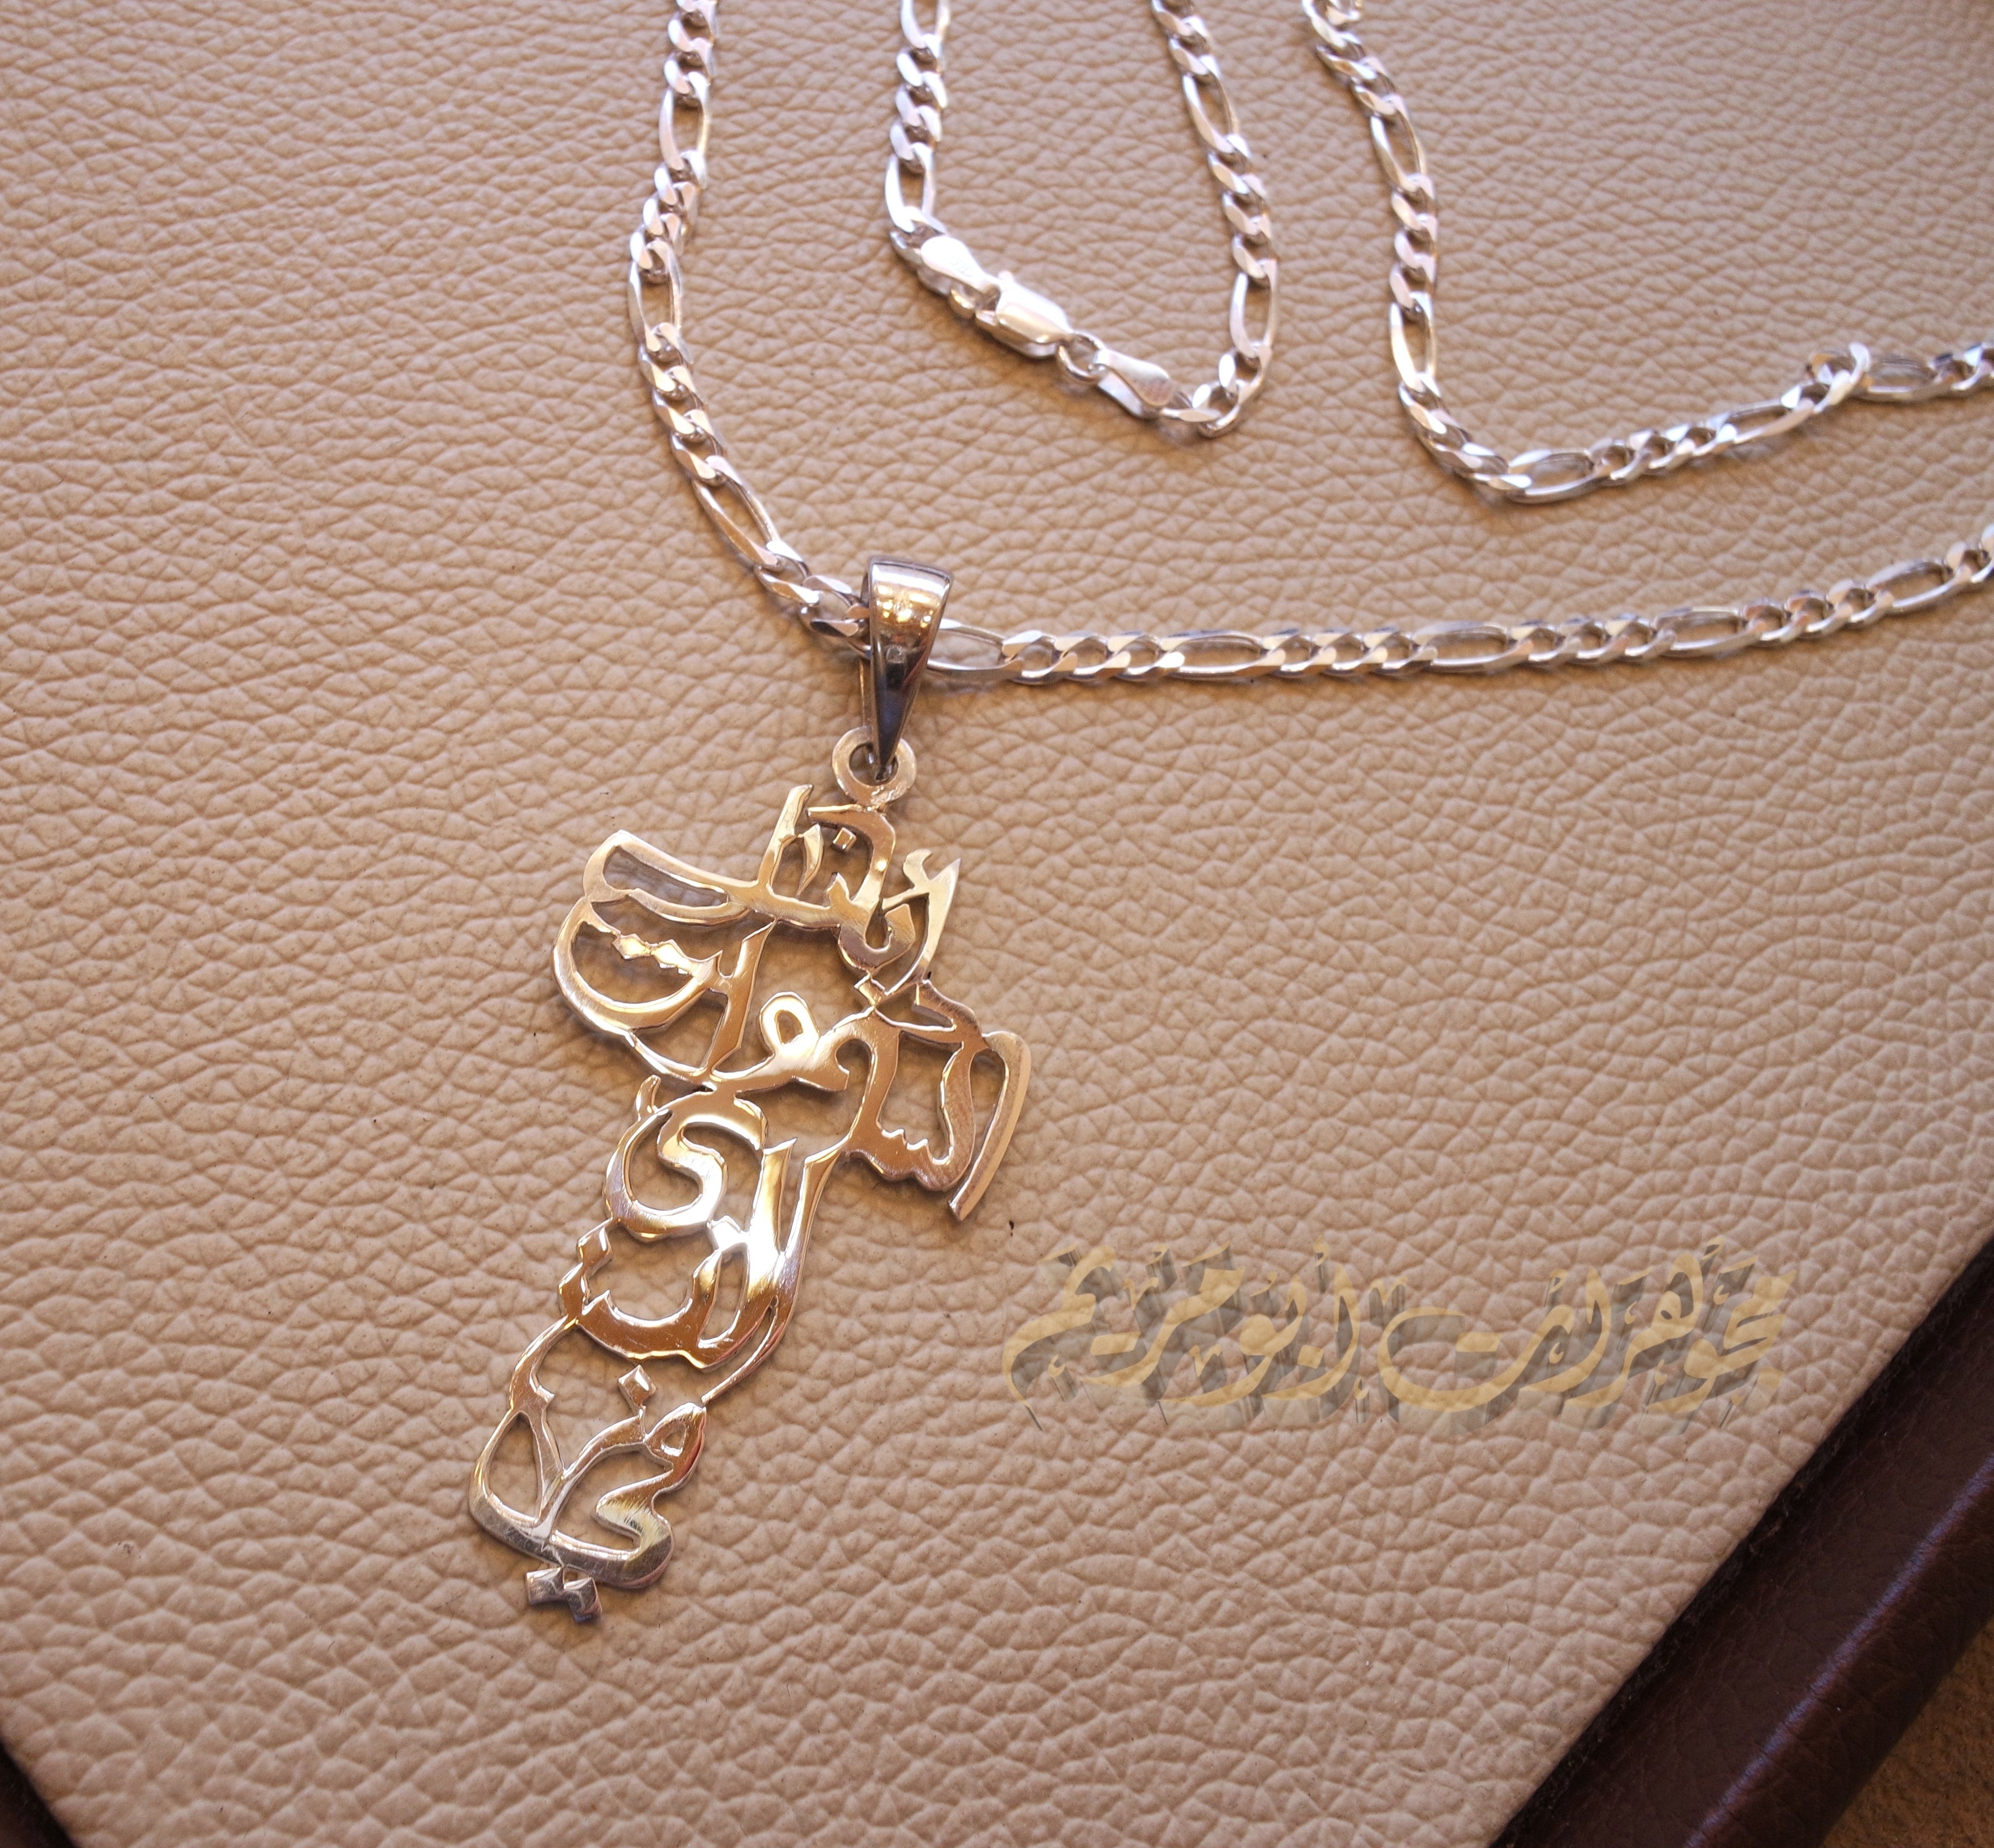 Arabic calligraphy big cross thick chain our father who art in heaven pendant sterling silver 925 catholic orthodox Christianity handmade